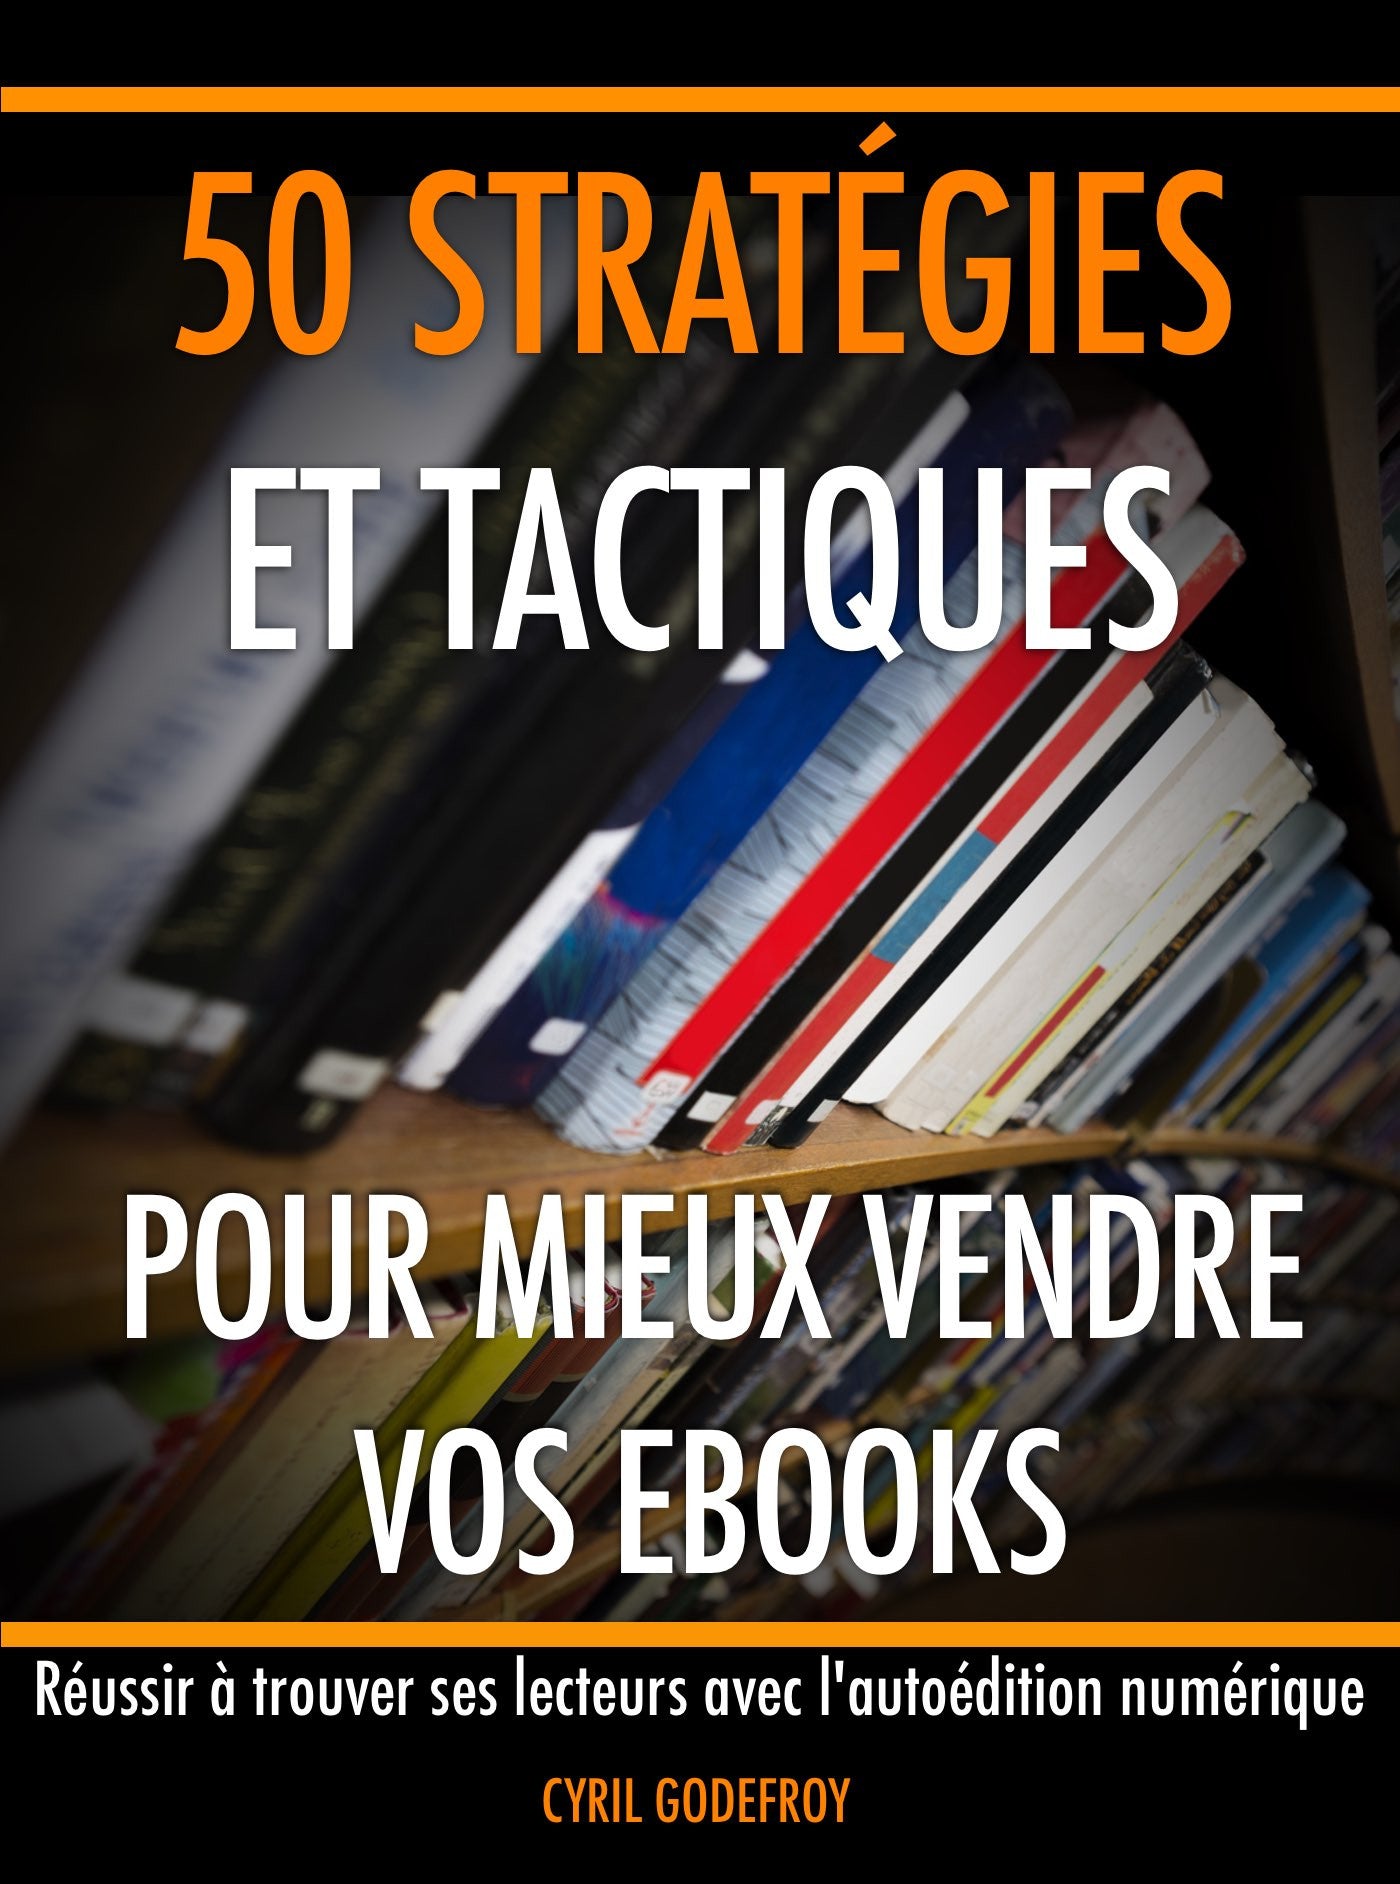 50 strategies and tactics to better sell your ebooks - ebook